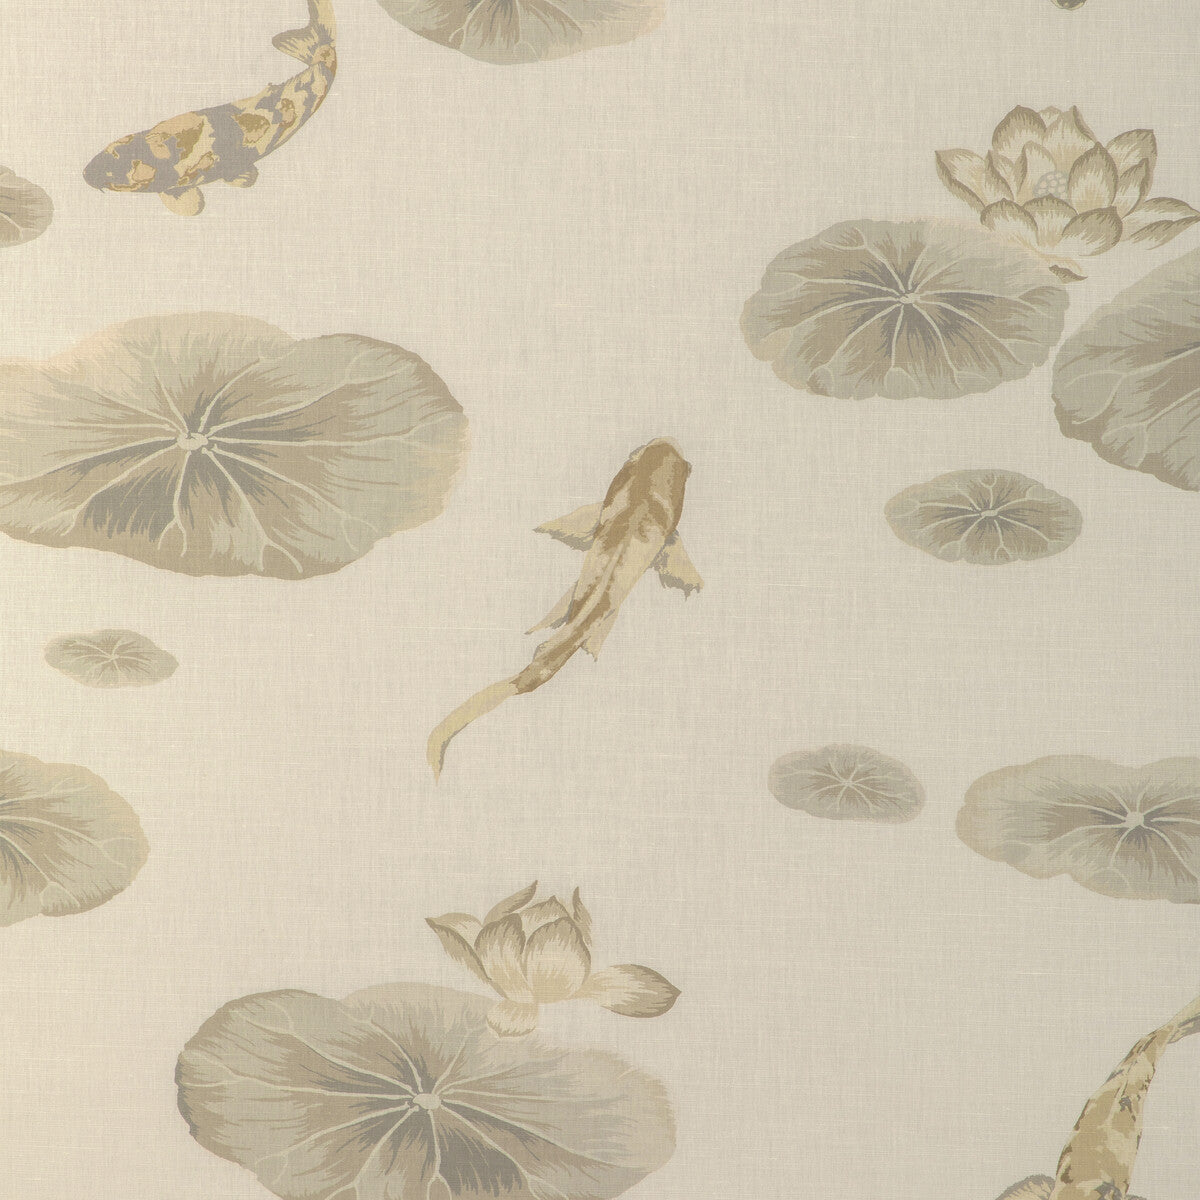 Lotus Print fabric in sandstone color - pattern LOTUSPRINT.16.0 - by Kravet Couture in the Casa Botanica collection